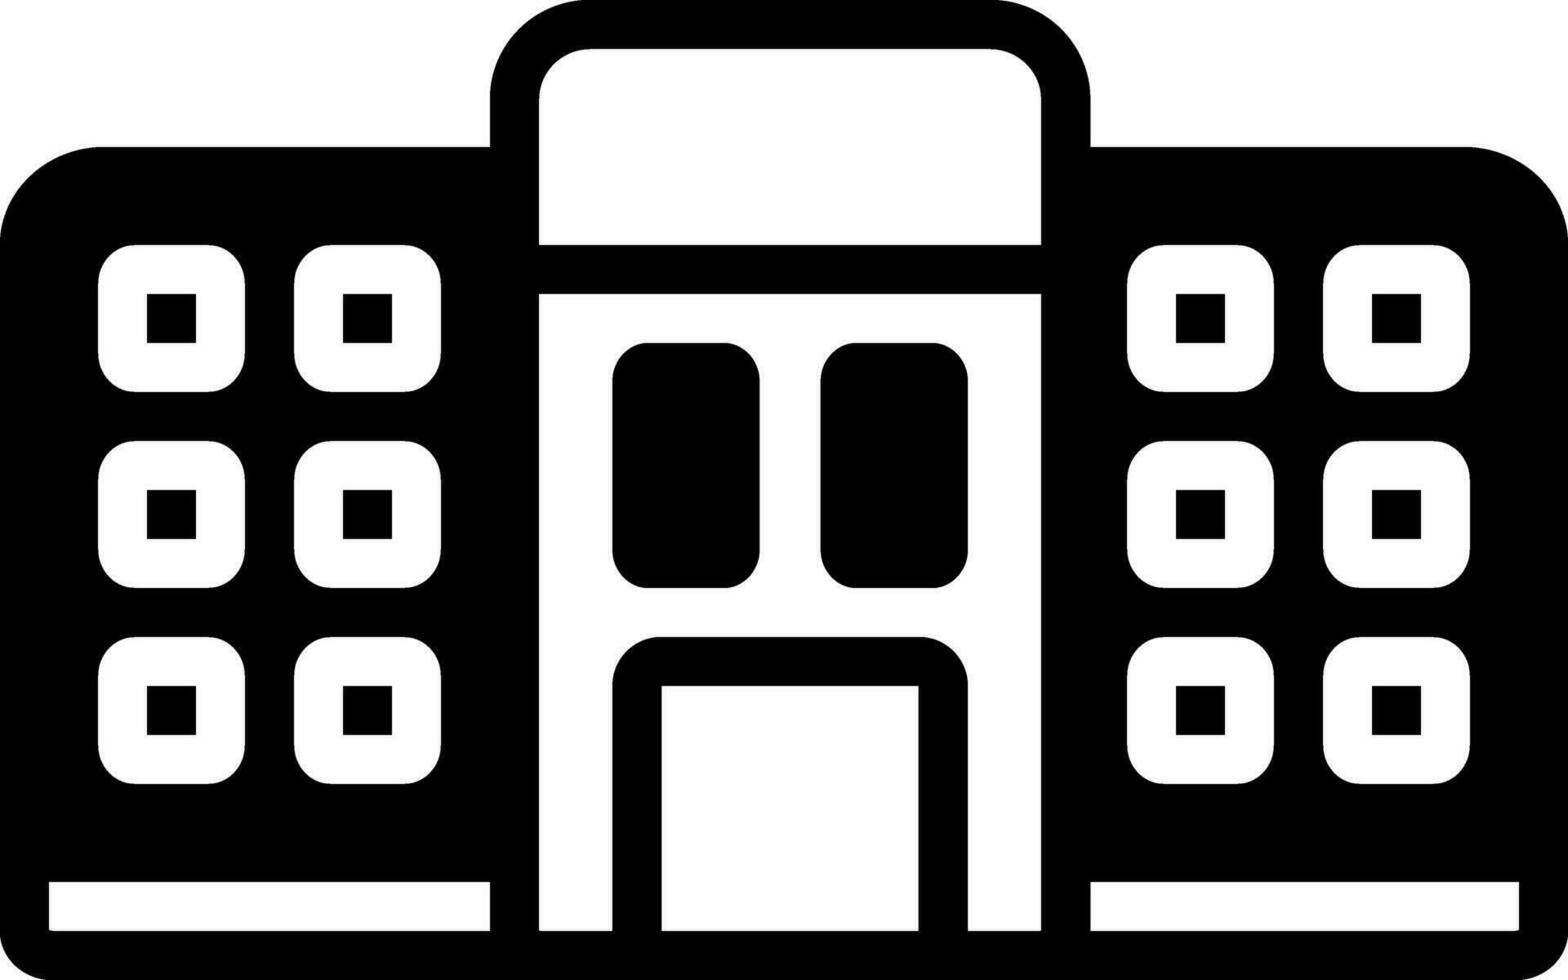 solid icon for hostel vector